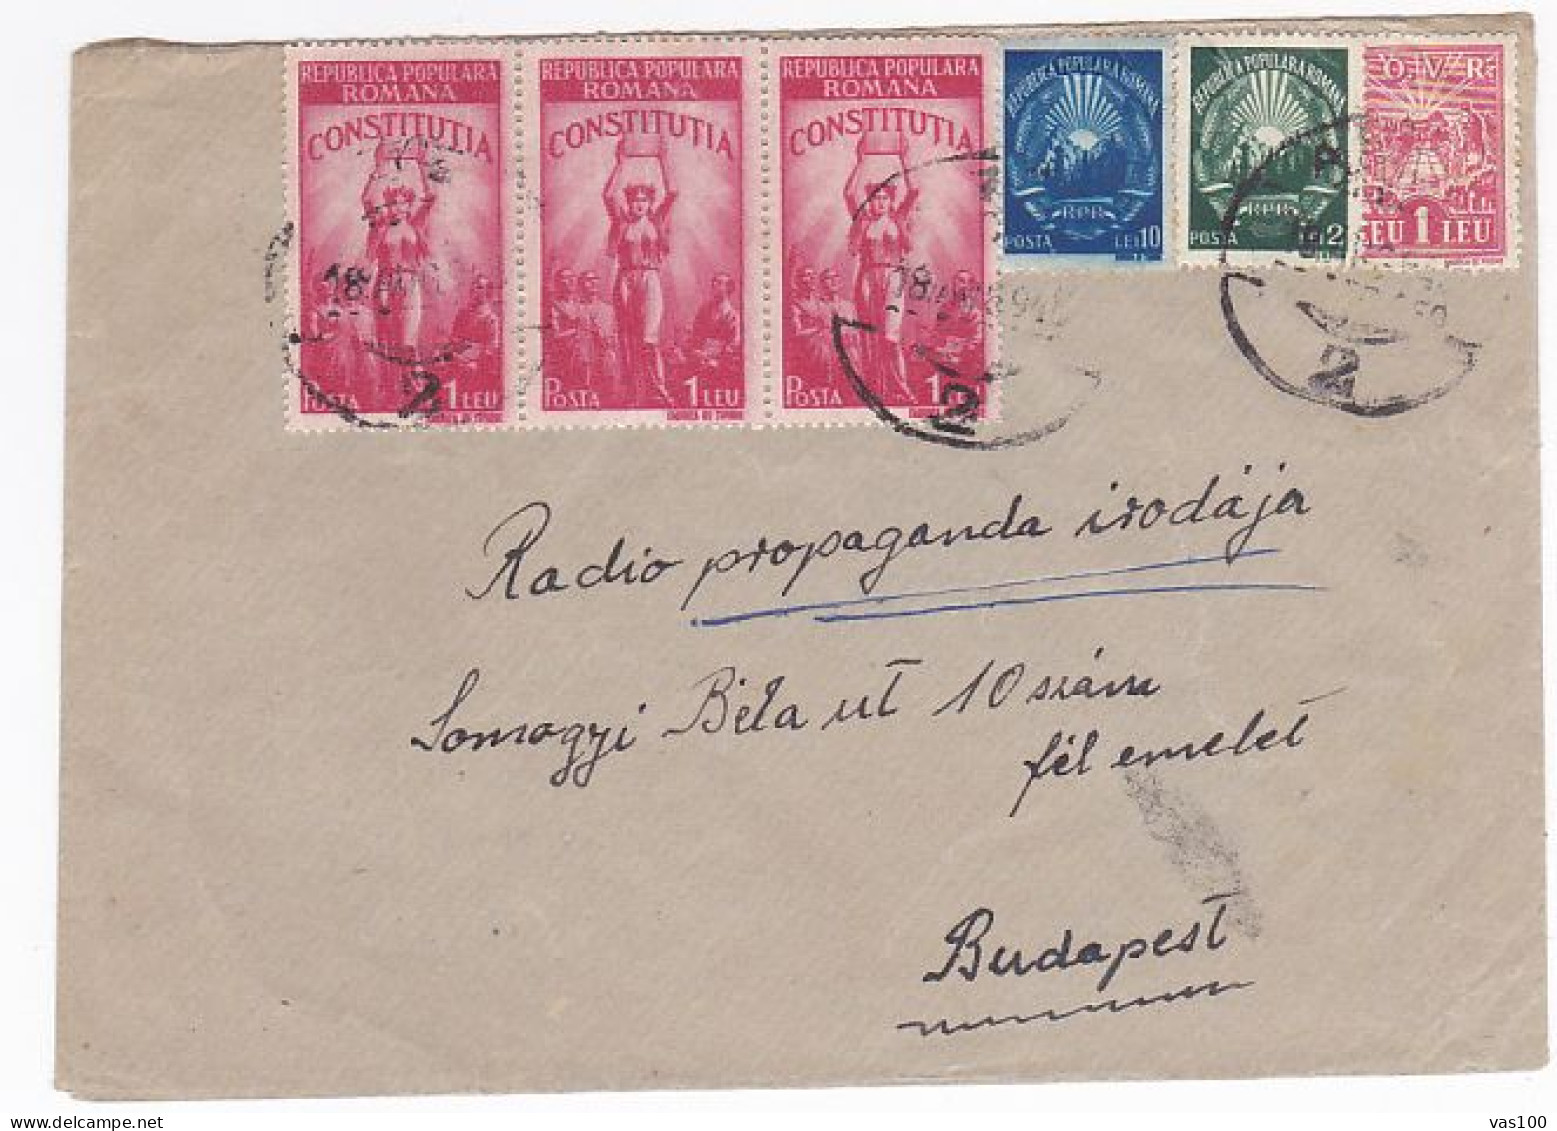 REVENUE STAMP, CONSTITUTION, REPUBLIC COAT OF ARMS, STAMPS ON COVER, 1948, ROMANIA - Fiscale Zegels